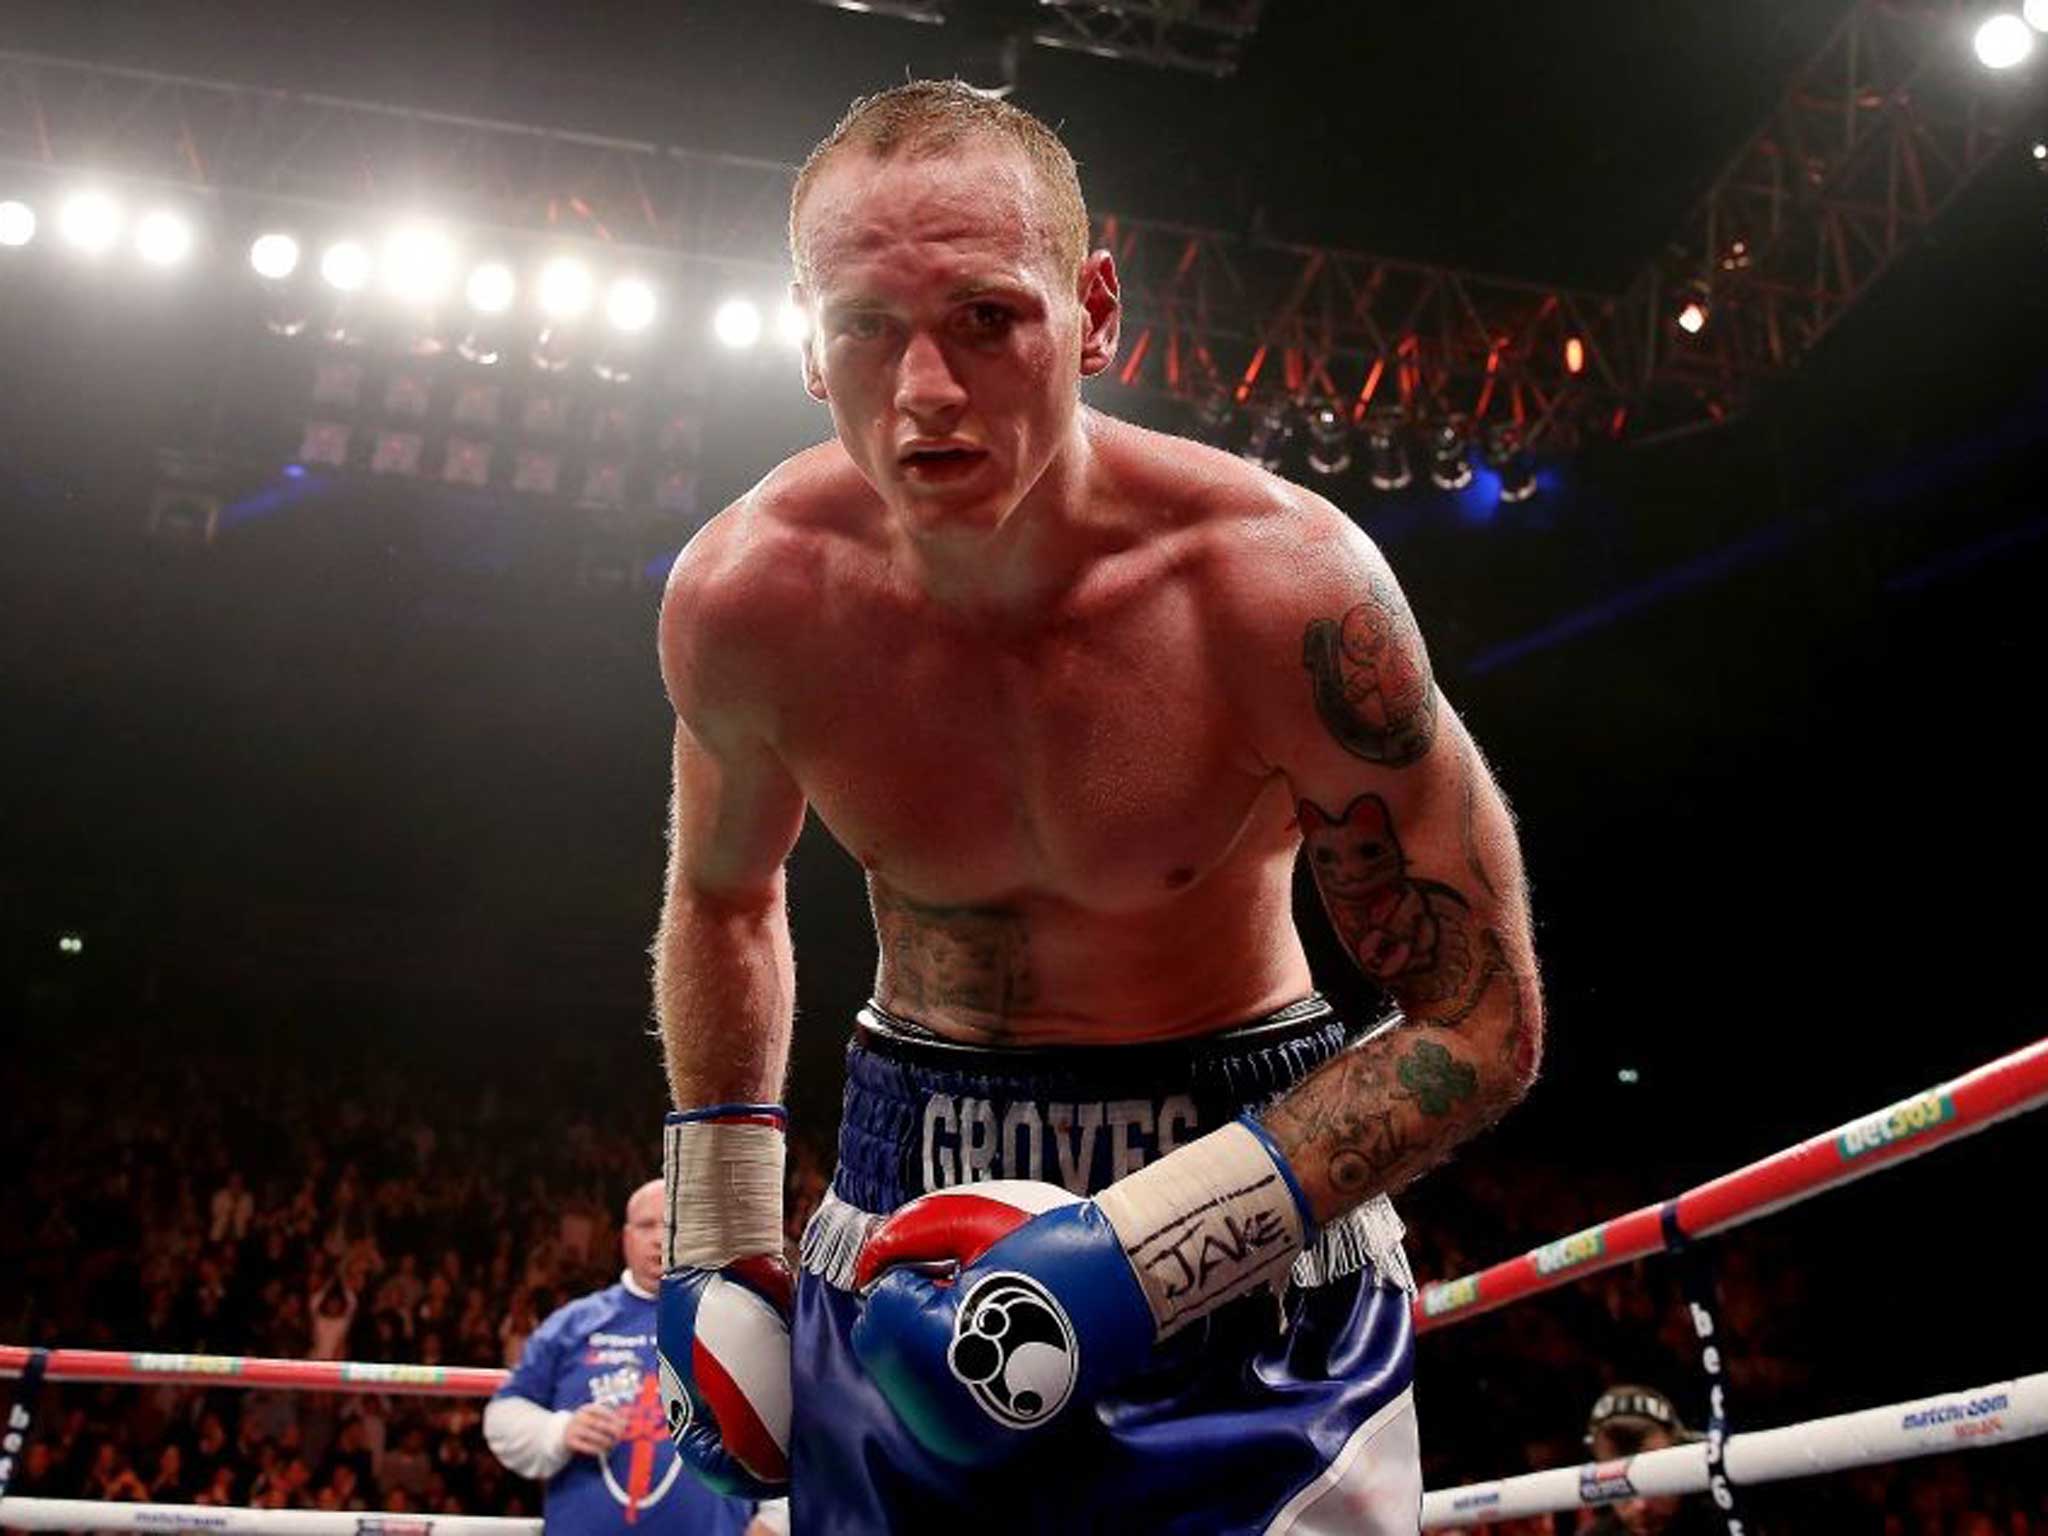 Second round: George Groves bows to the crowd after his defeat to Carl Froch in November. This time many believe the younger man will gain his revenge